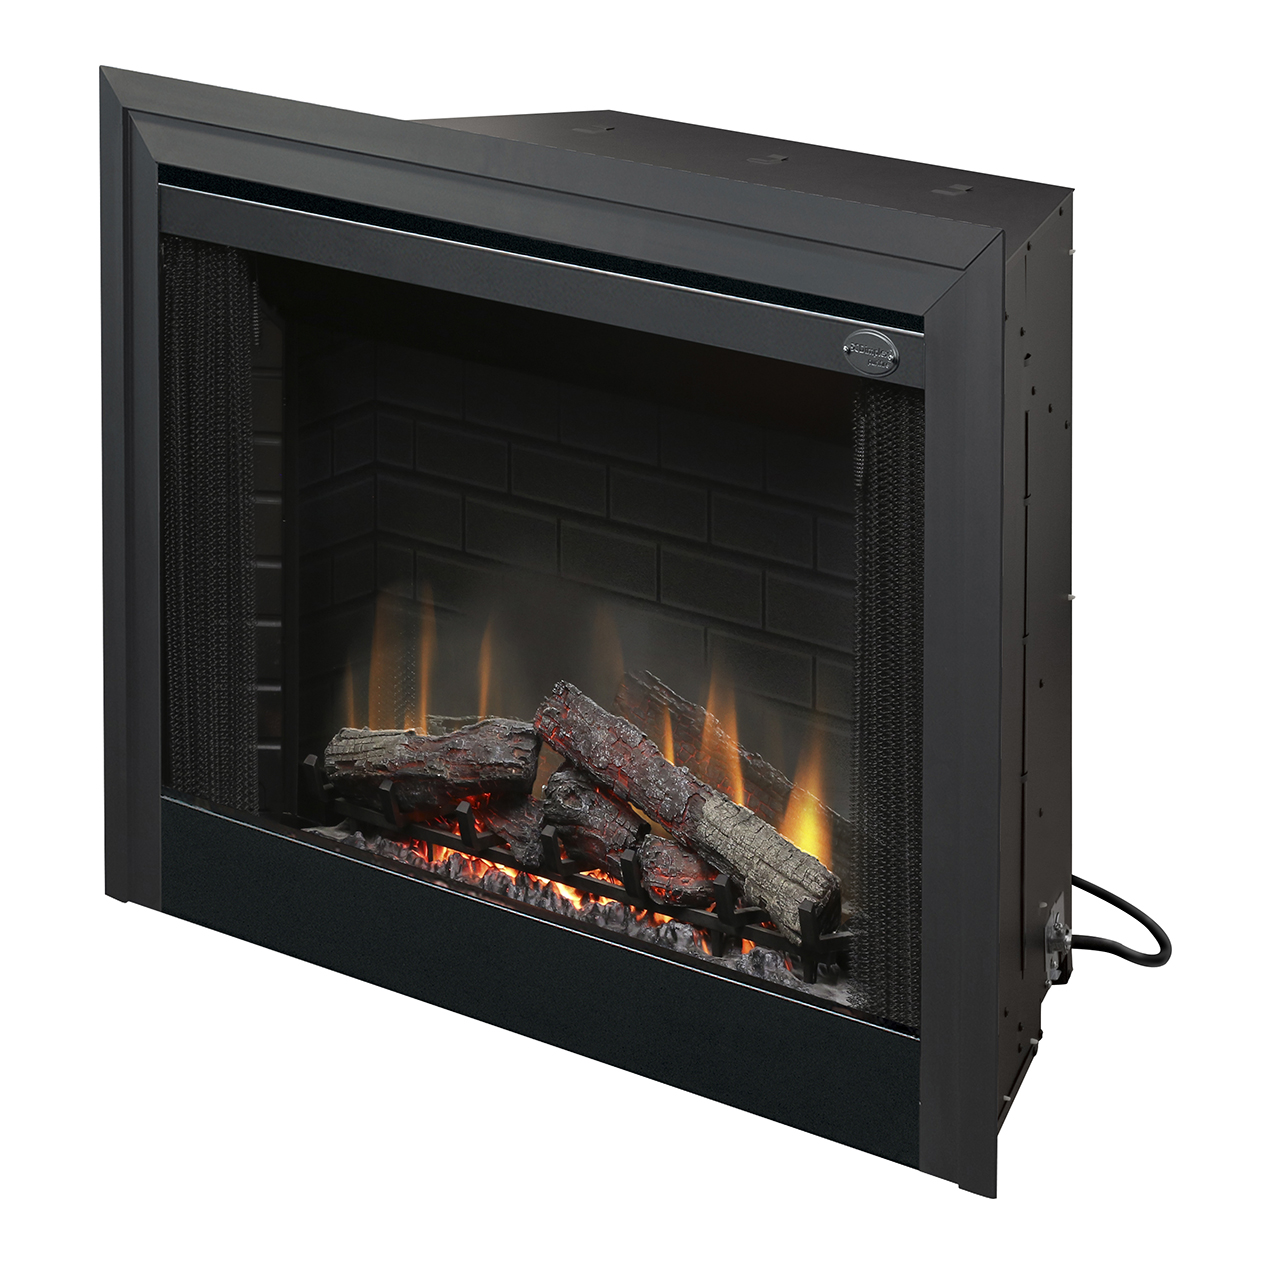 Deluxe Built-In Electric Fireplace - 39"